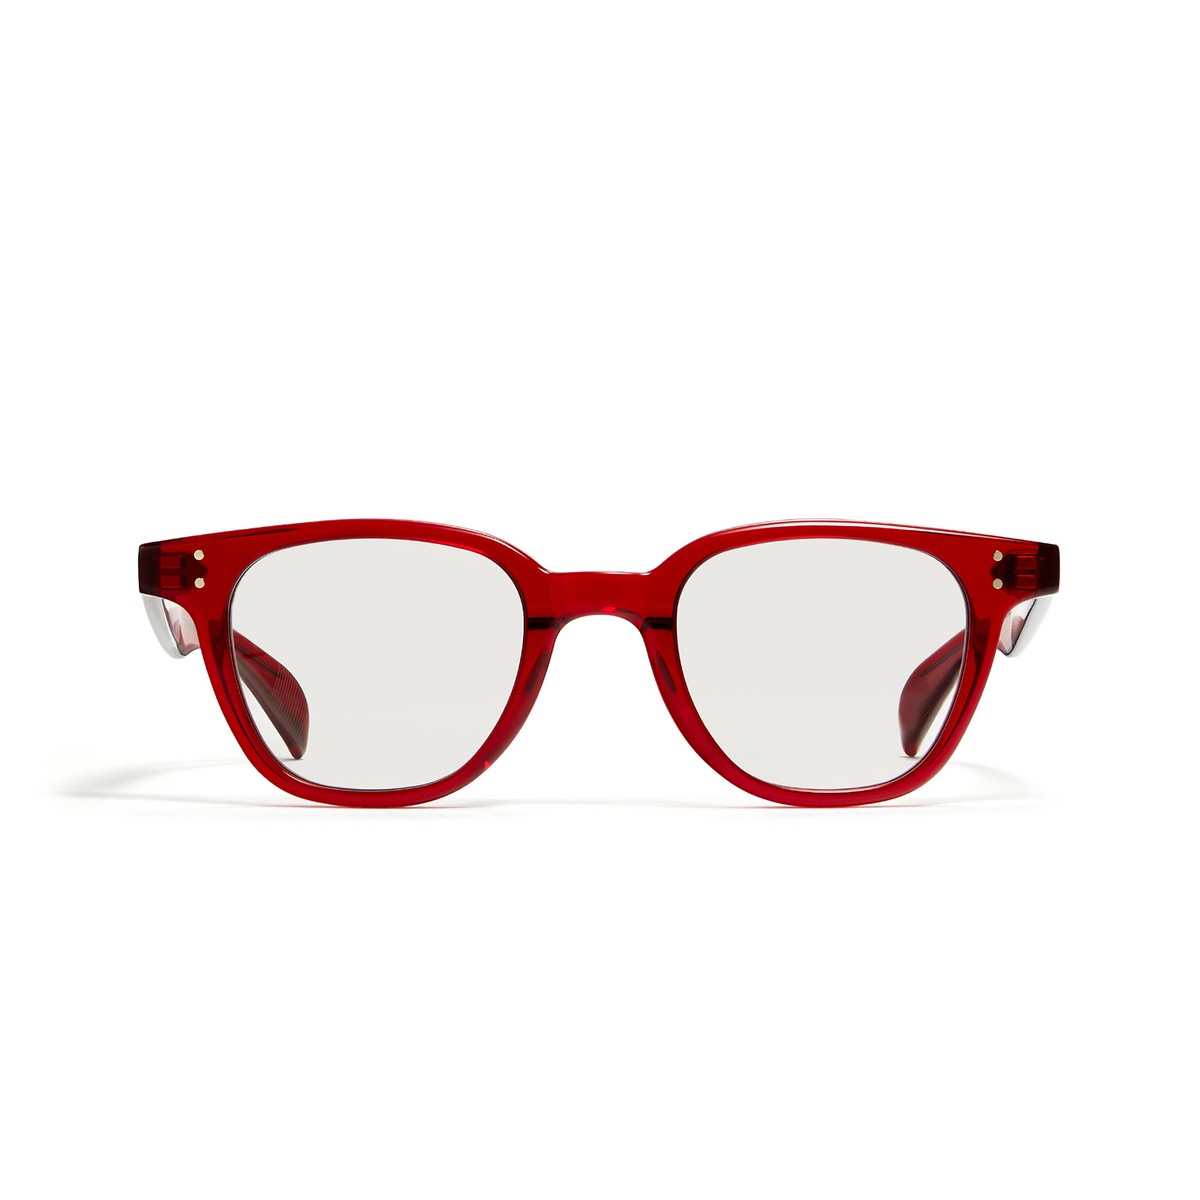 Gentle Monster® Square Eyeglasses: Dadio color RC1 Red - front view